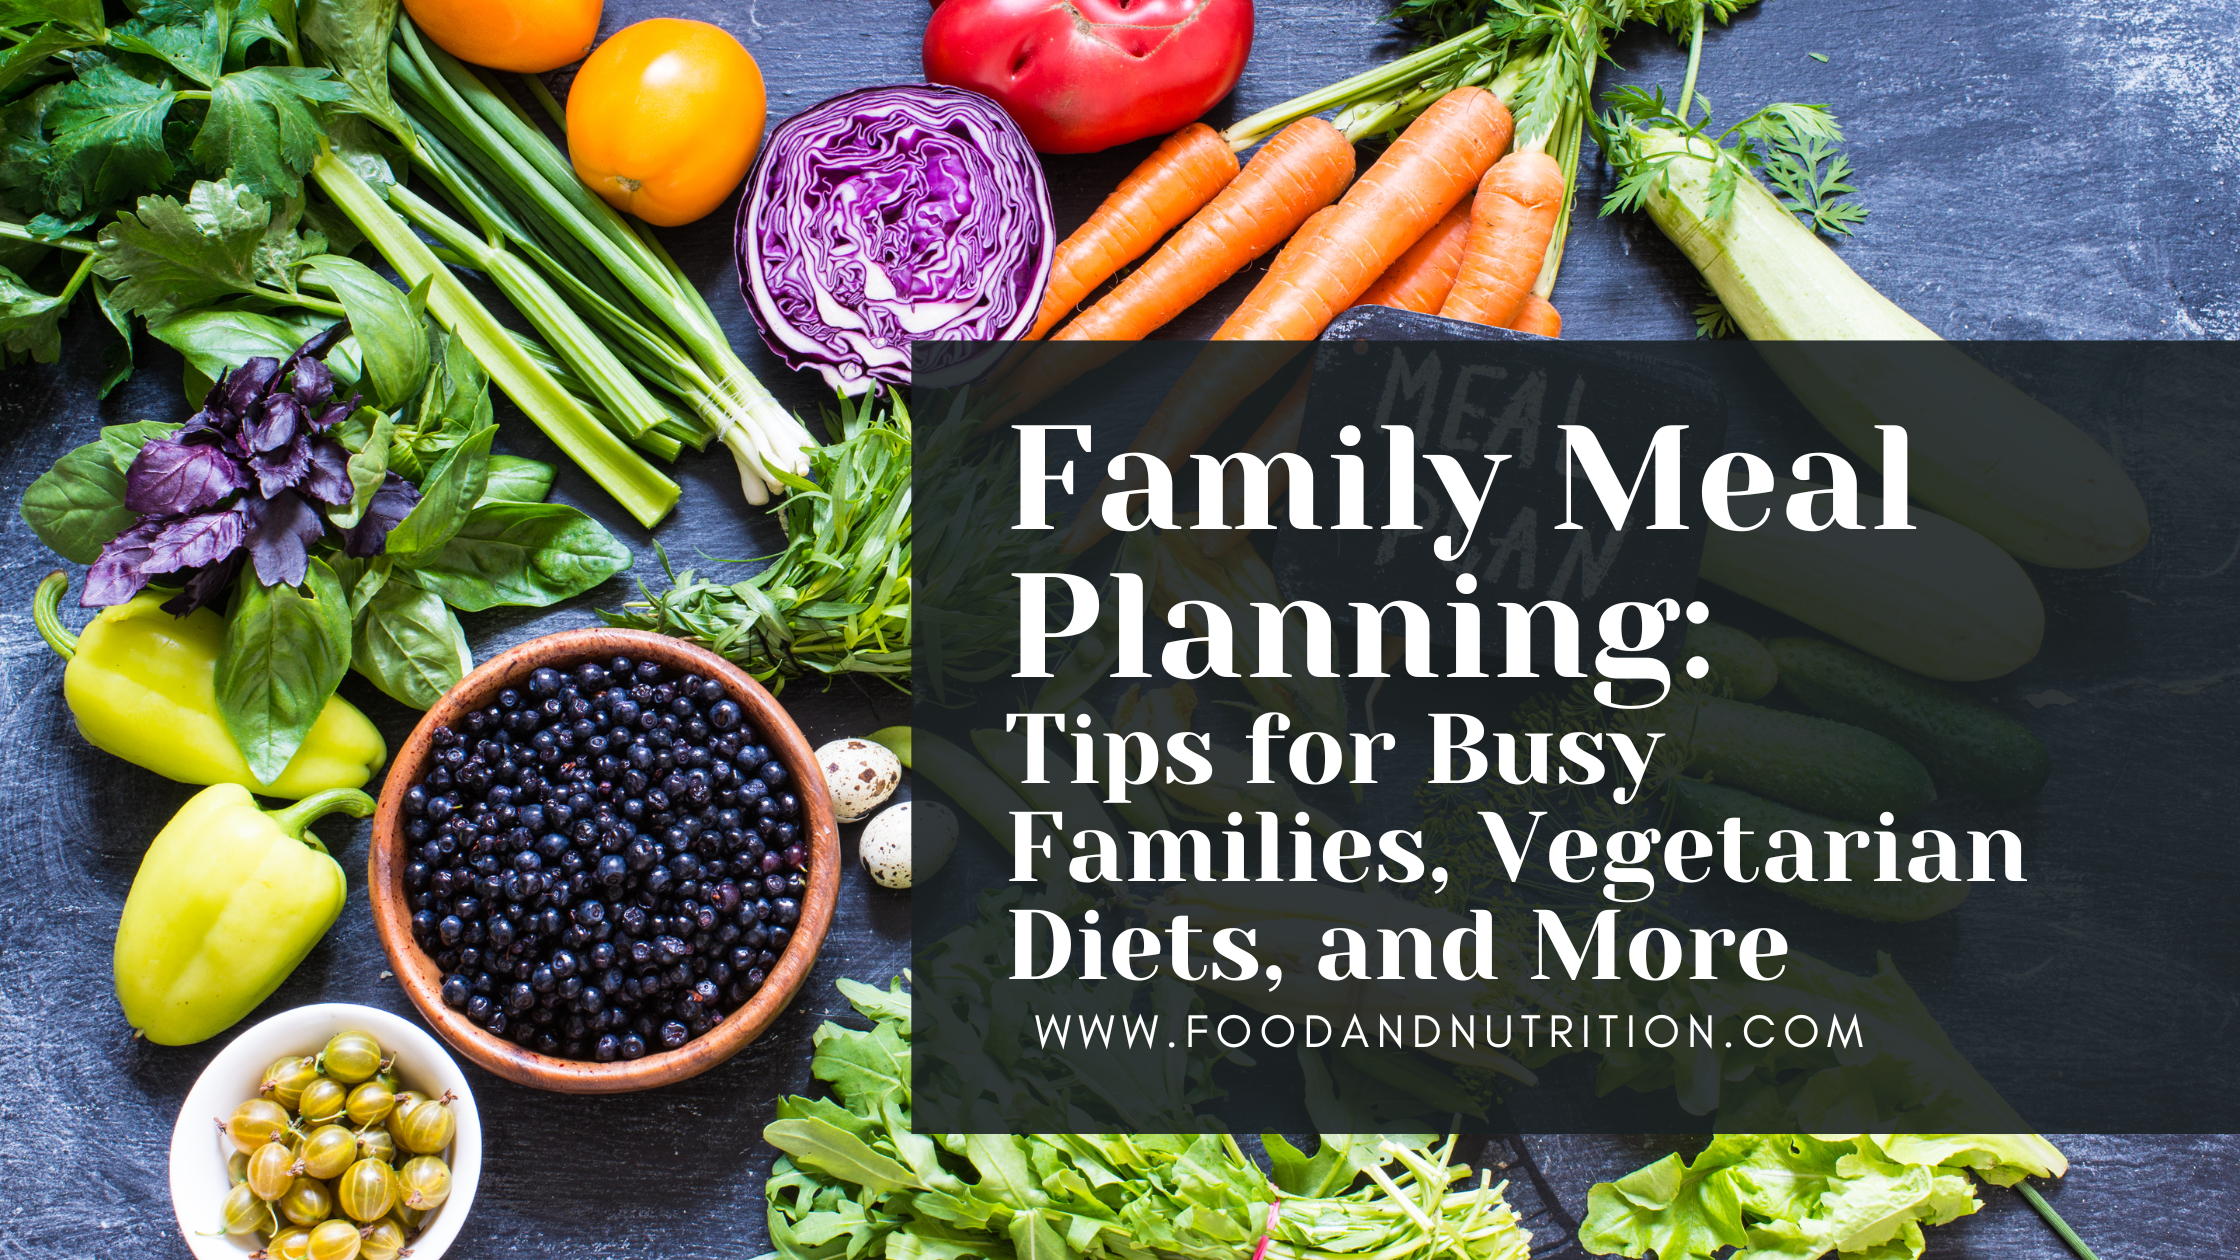 Family Meal Planning: Tips for Busy Families, Vegetarian Diets, and More